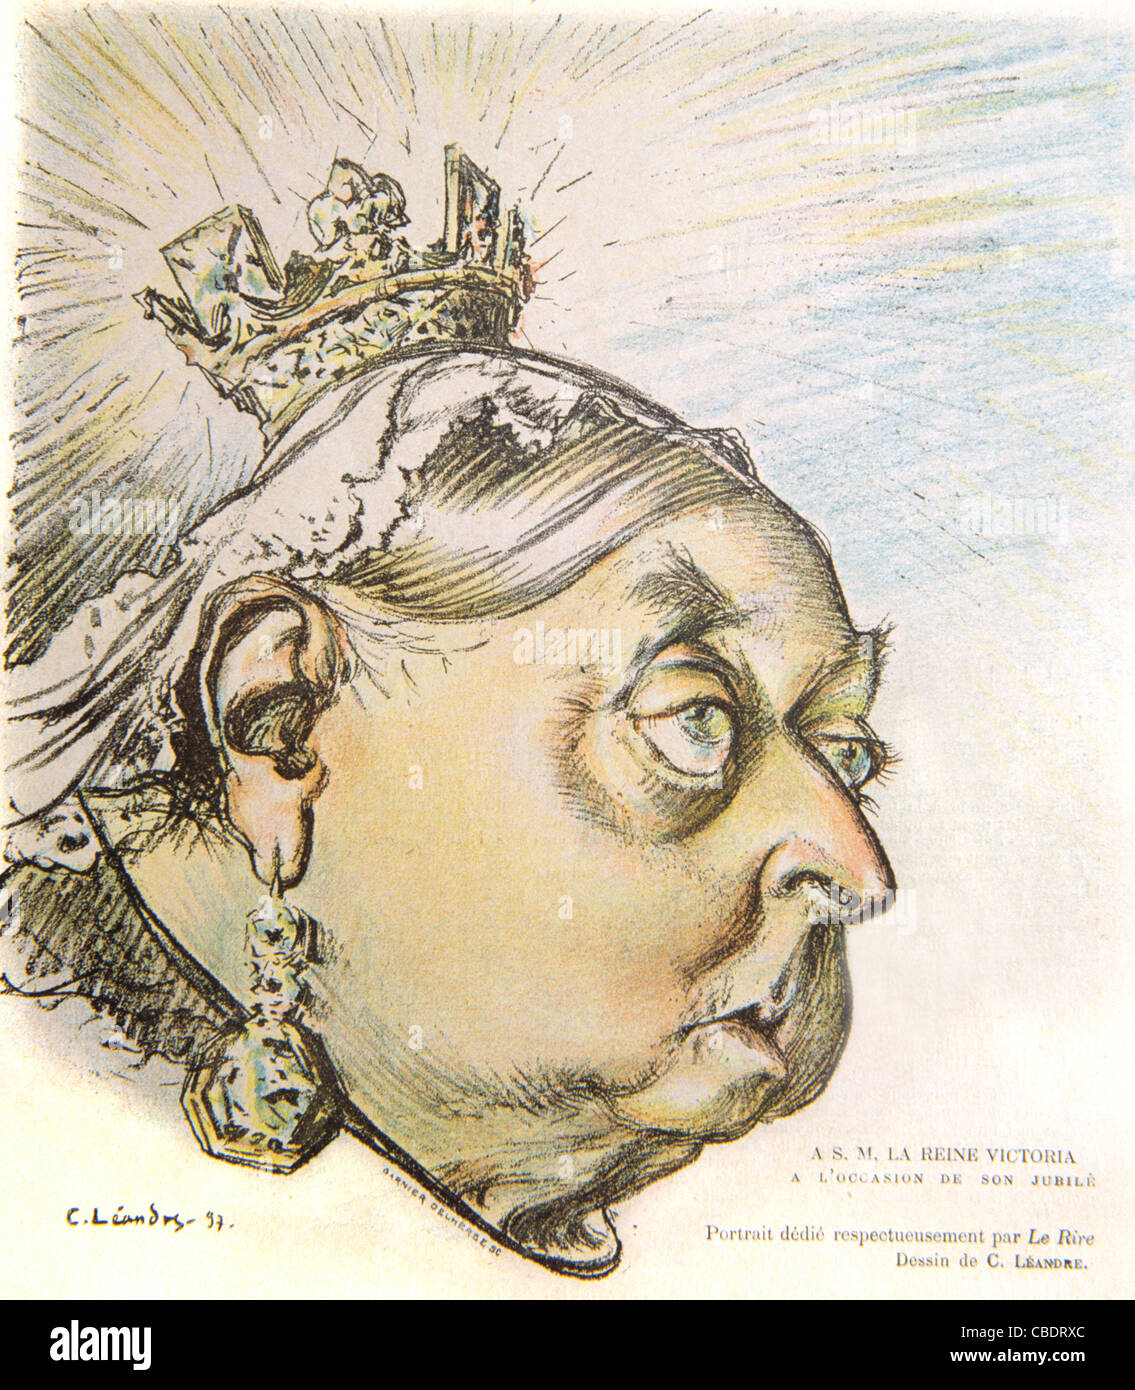 Satirical Cartoon & Portrait of Queen Victoria on Sixtieth Jubilee of her Reign. Cover of French Satirical Magazine, 'Le Rire', June 1897 Stock Photo